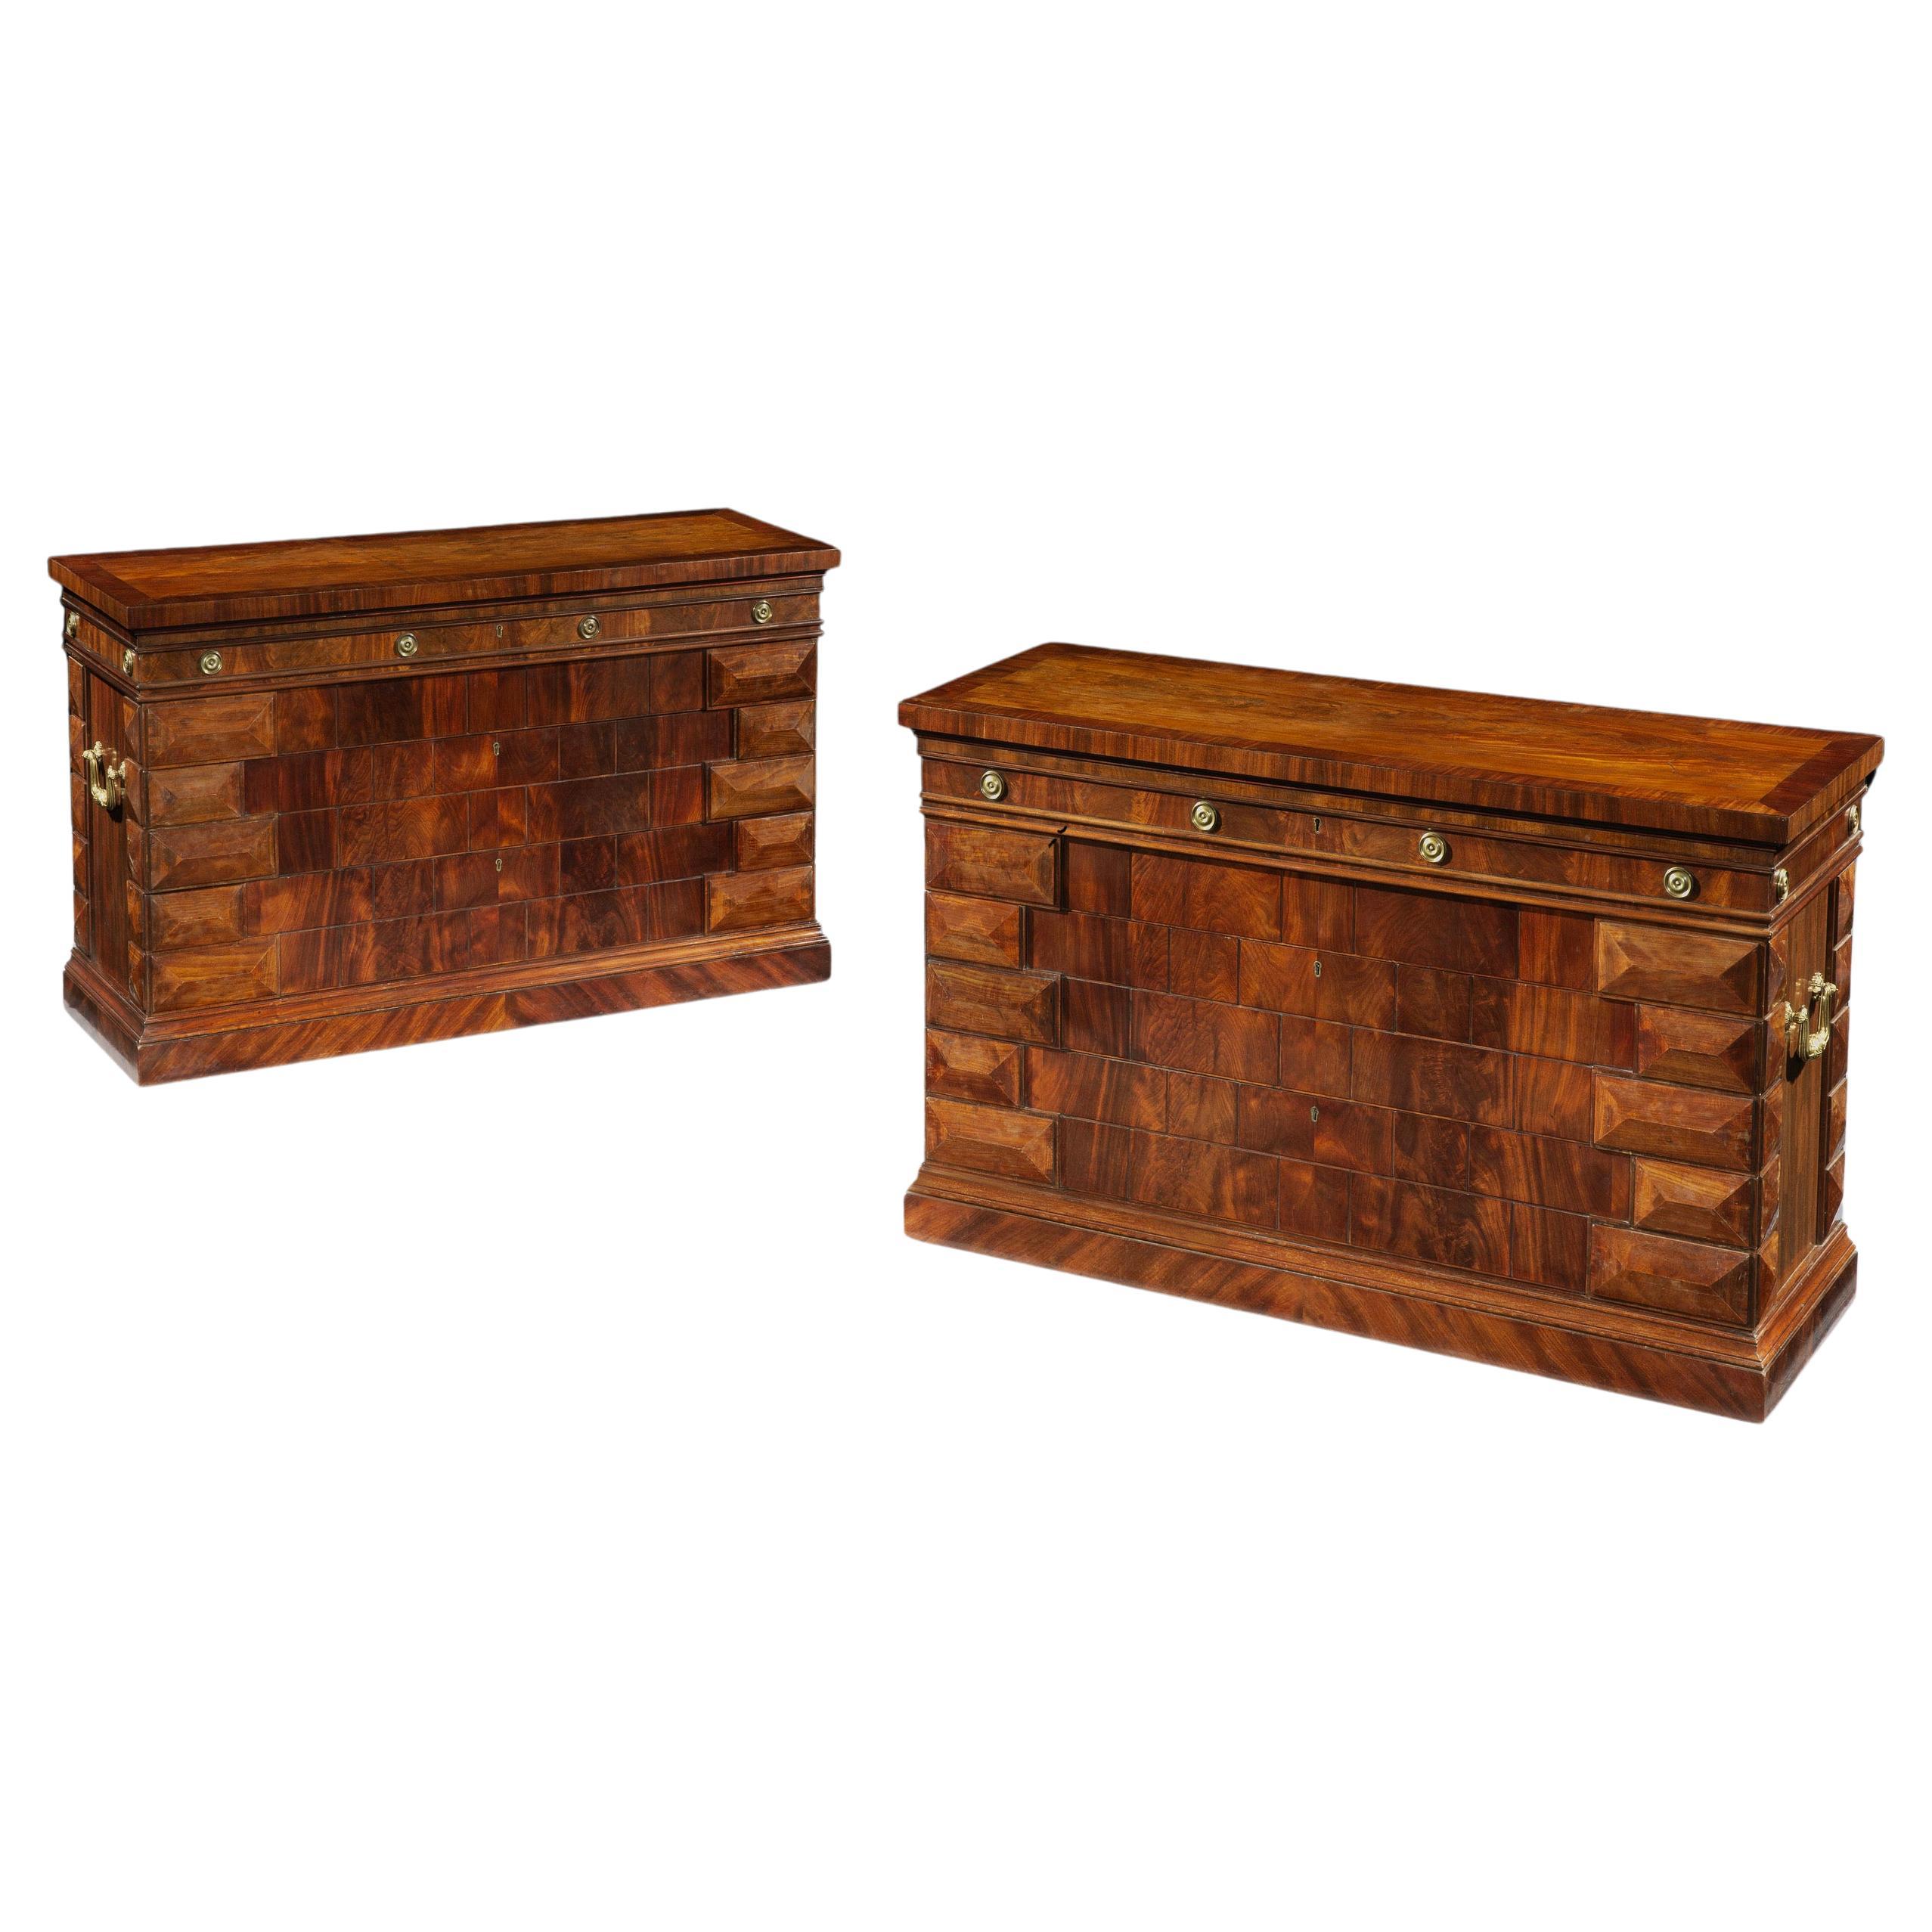 A Pair of Scottish George IV Mahogany Architectural Commodes